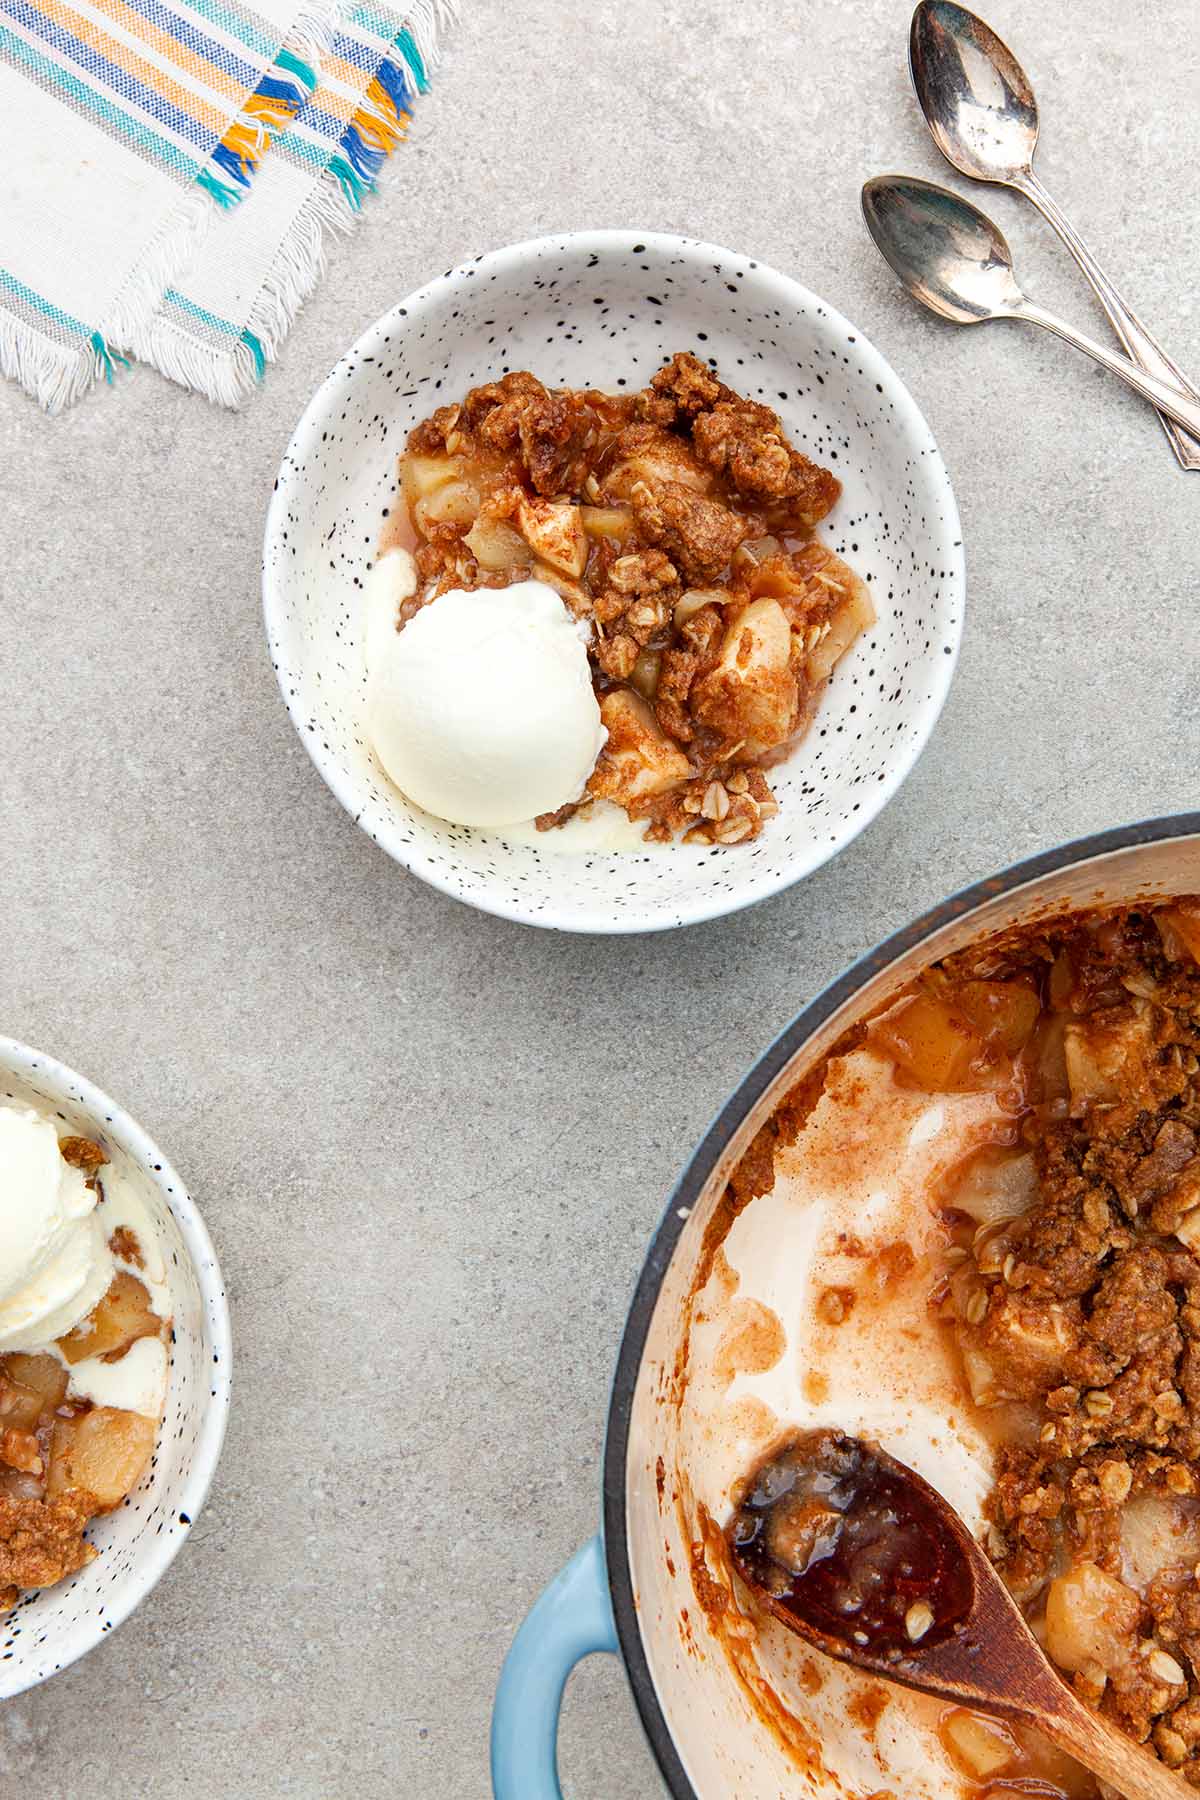 Two servings of Dutch oven apple crisp with ice cream in bowl on a stone surface next to the pot.